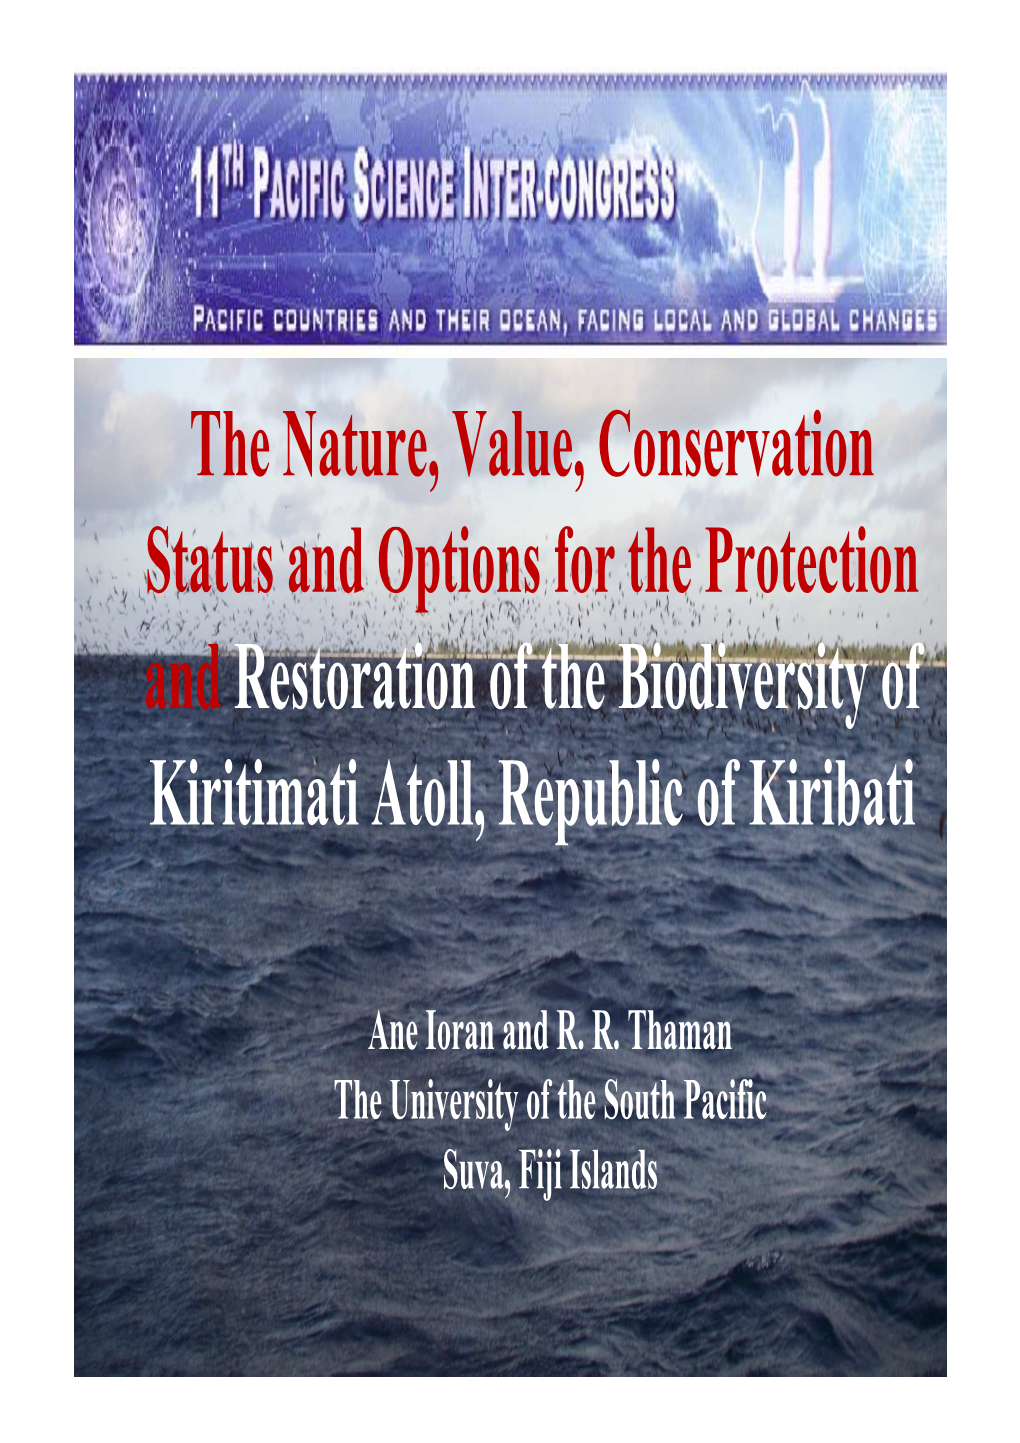 The Nature, Value, Conservation Status and Options for the Protection and Restoration of the Biodiversity of Kiritimati Atoll, Republic of Kiribati